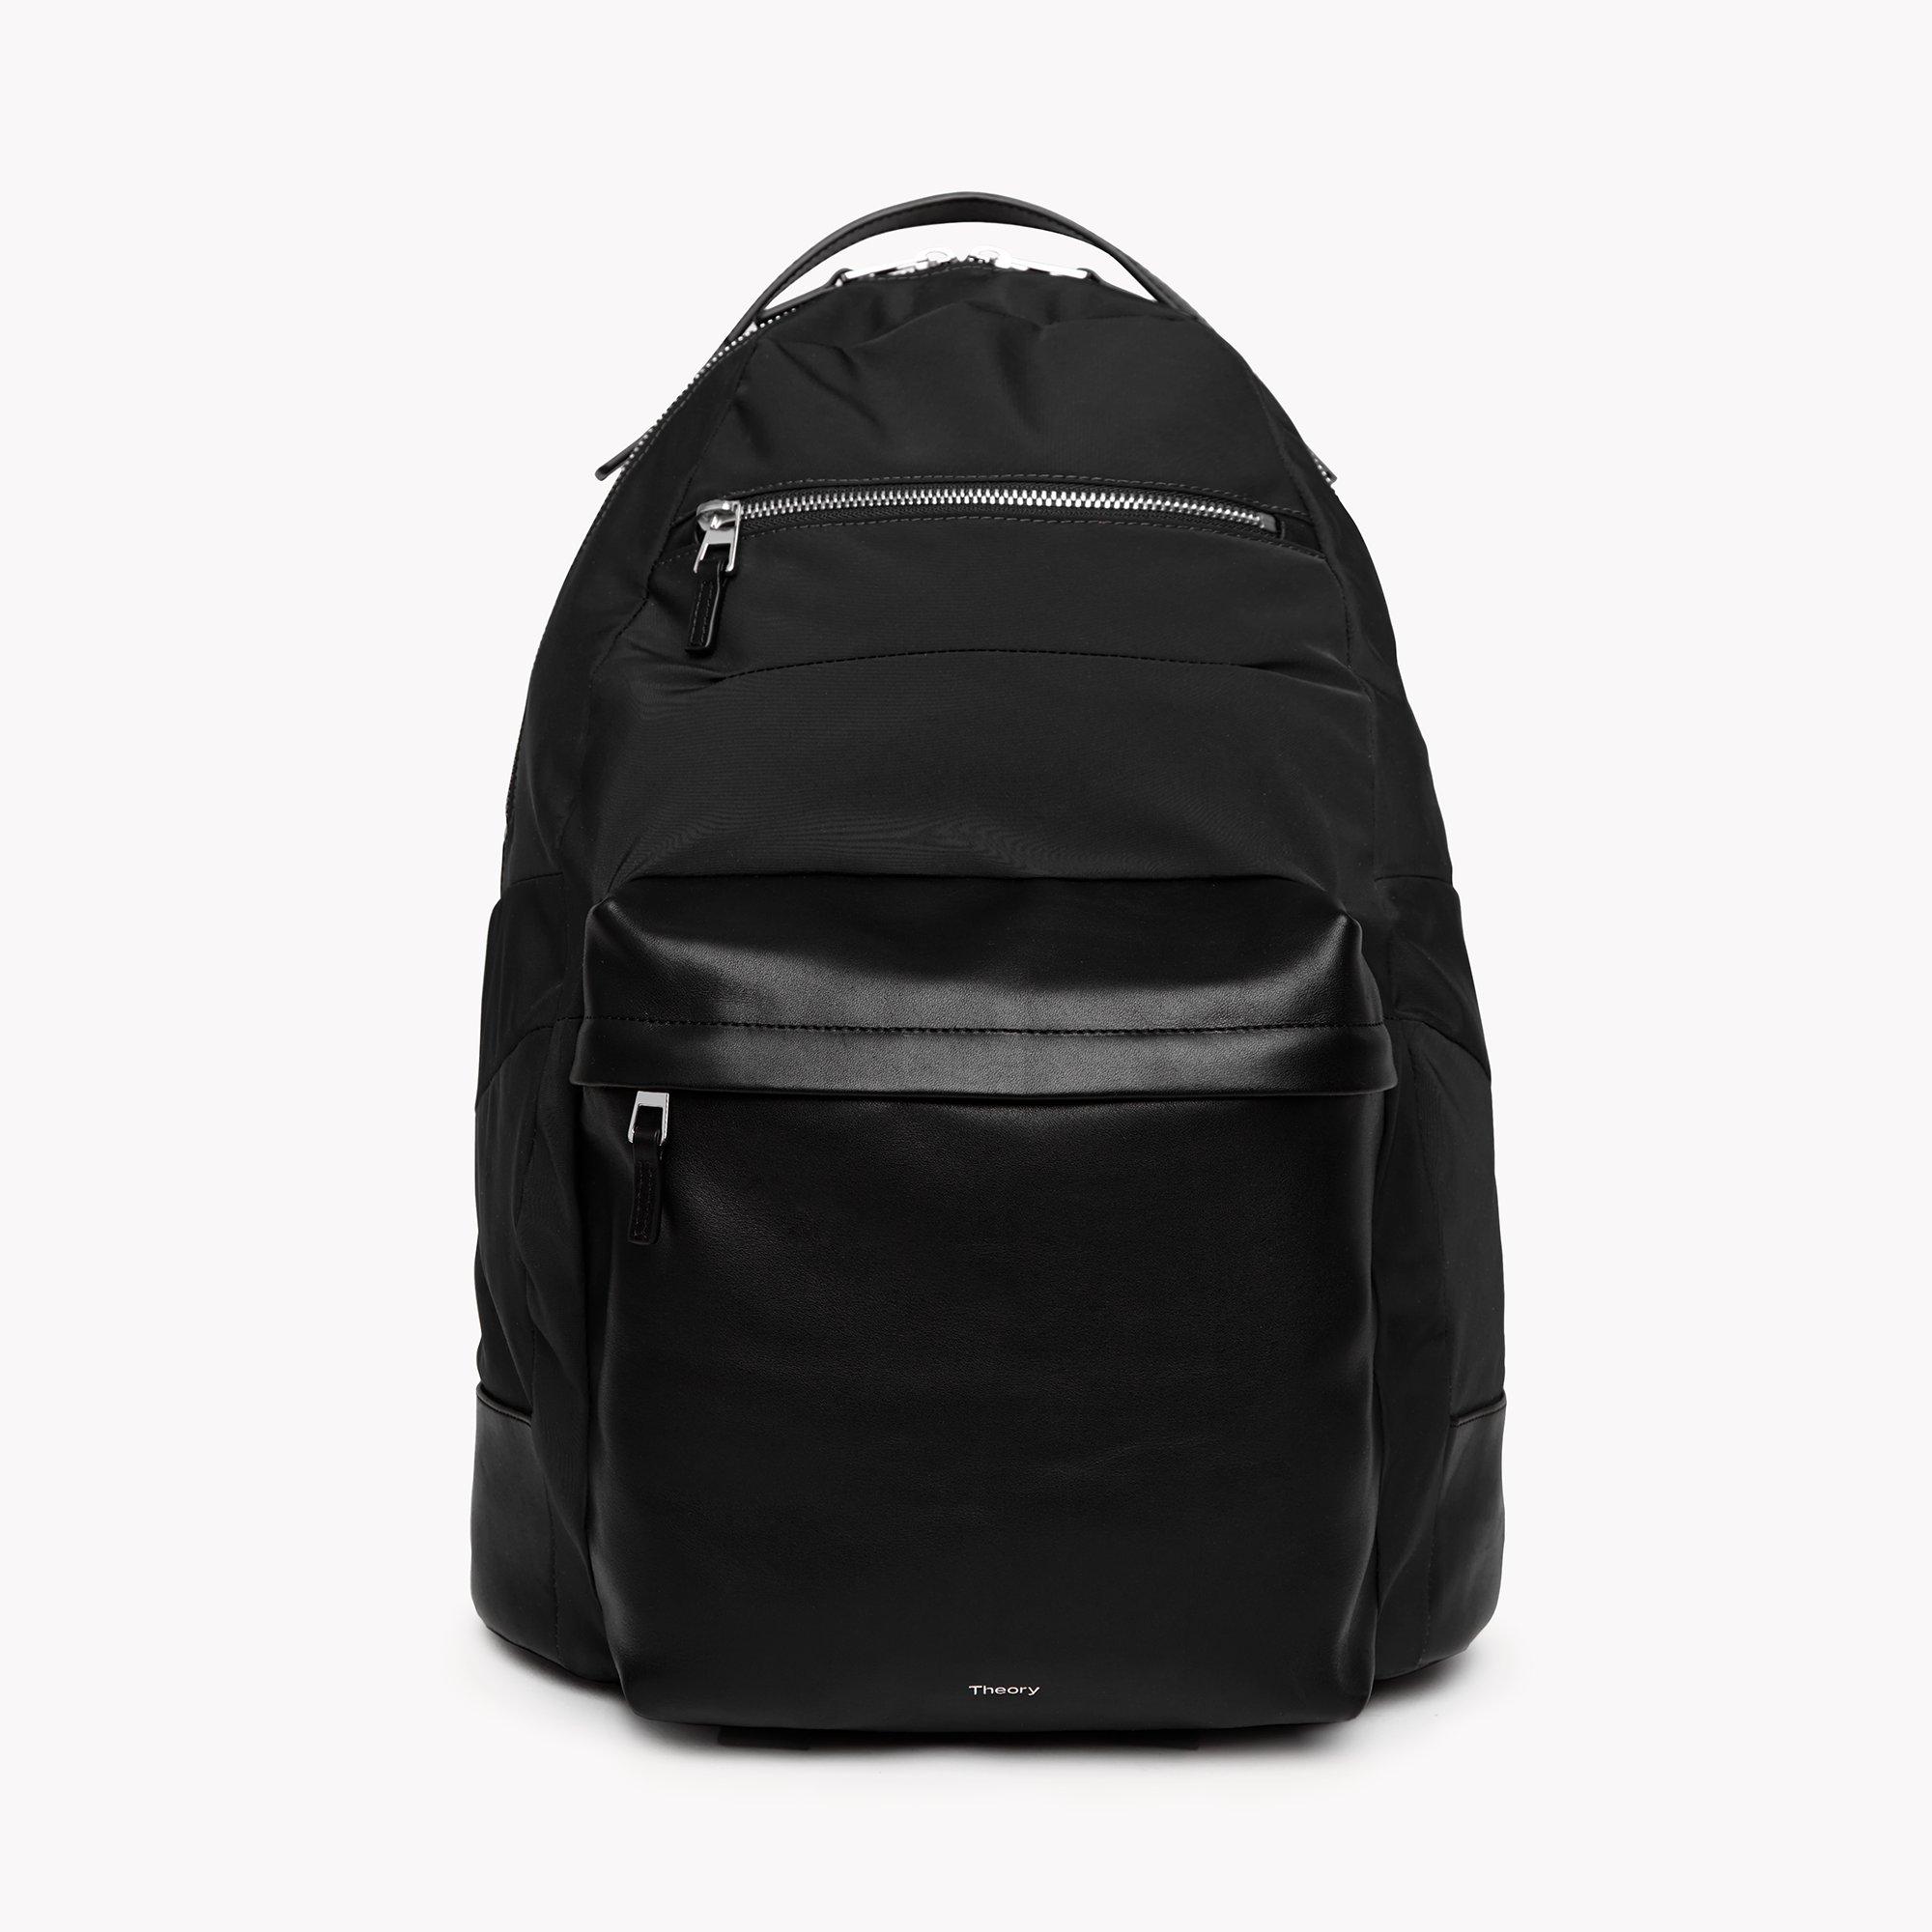 jansport 50th anniversary backpack